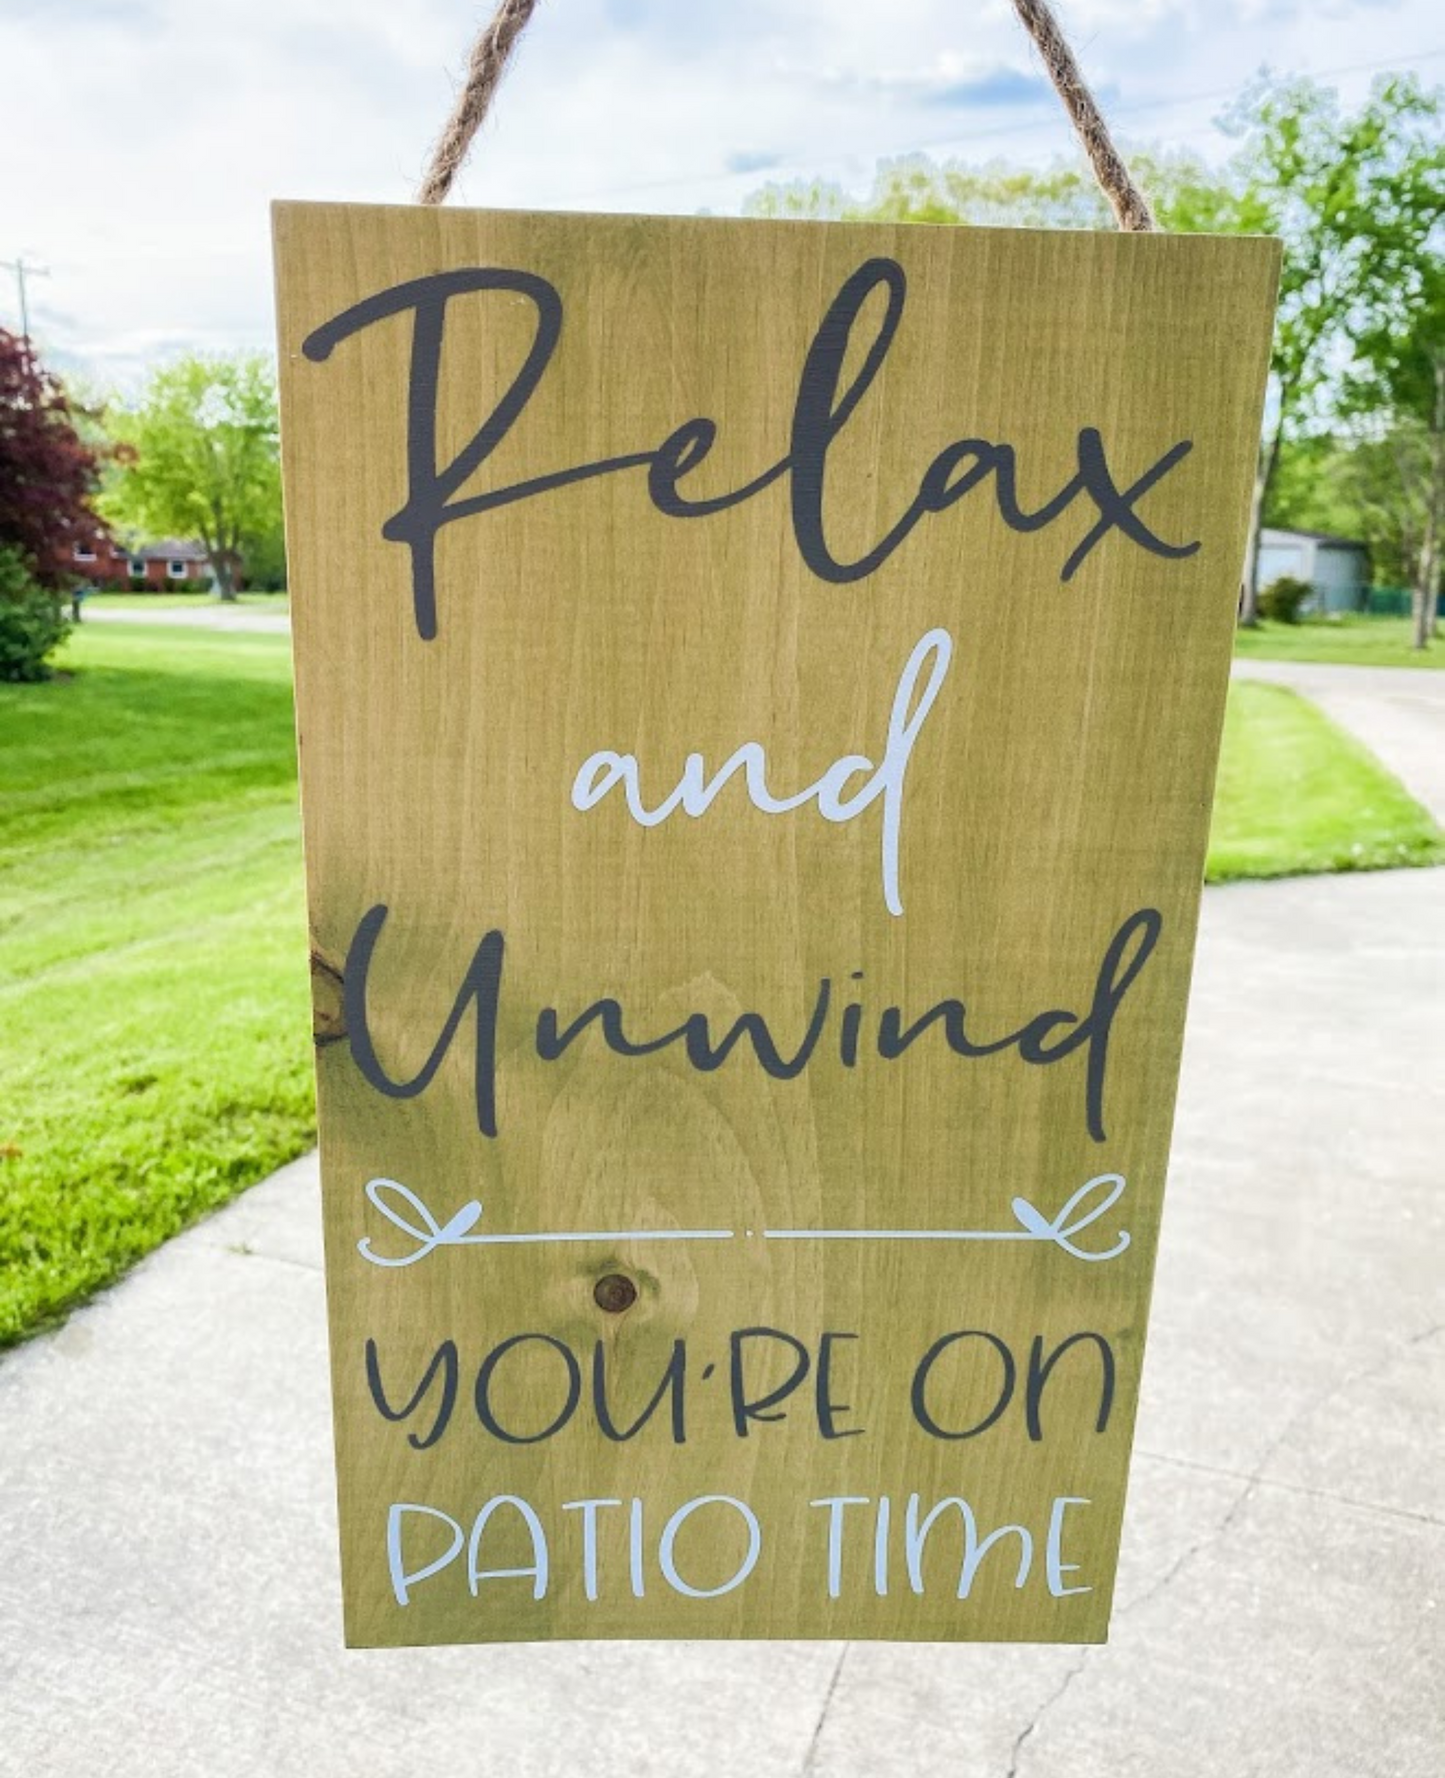 Relax & Unwind You're On Patio Time - B-Cozy Home Decor